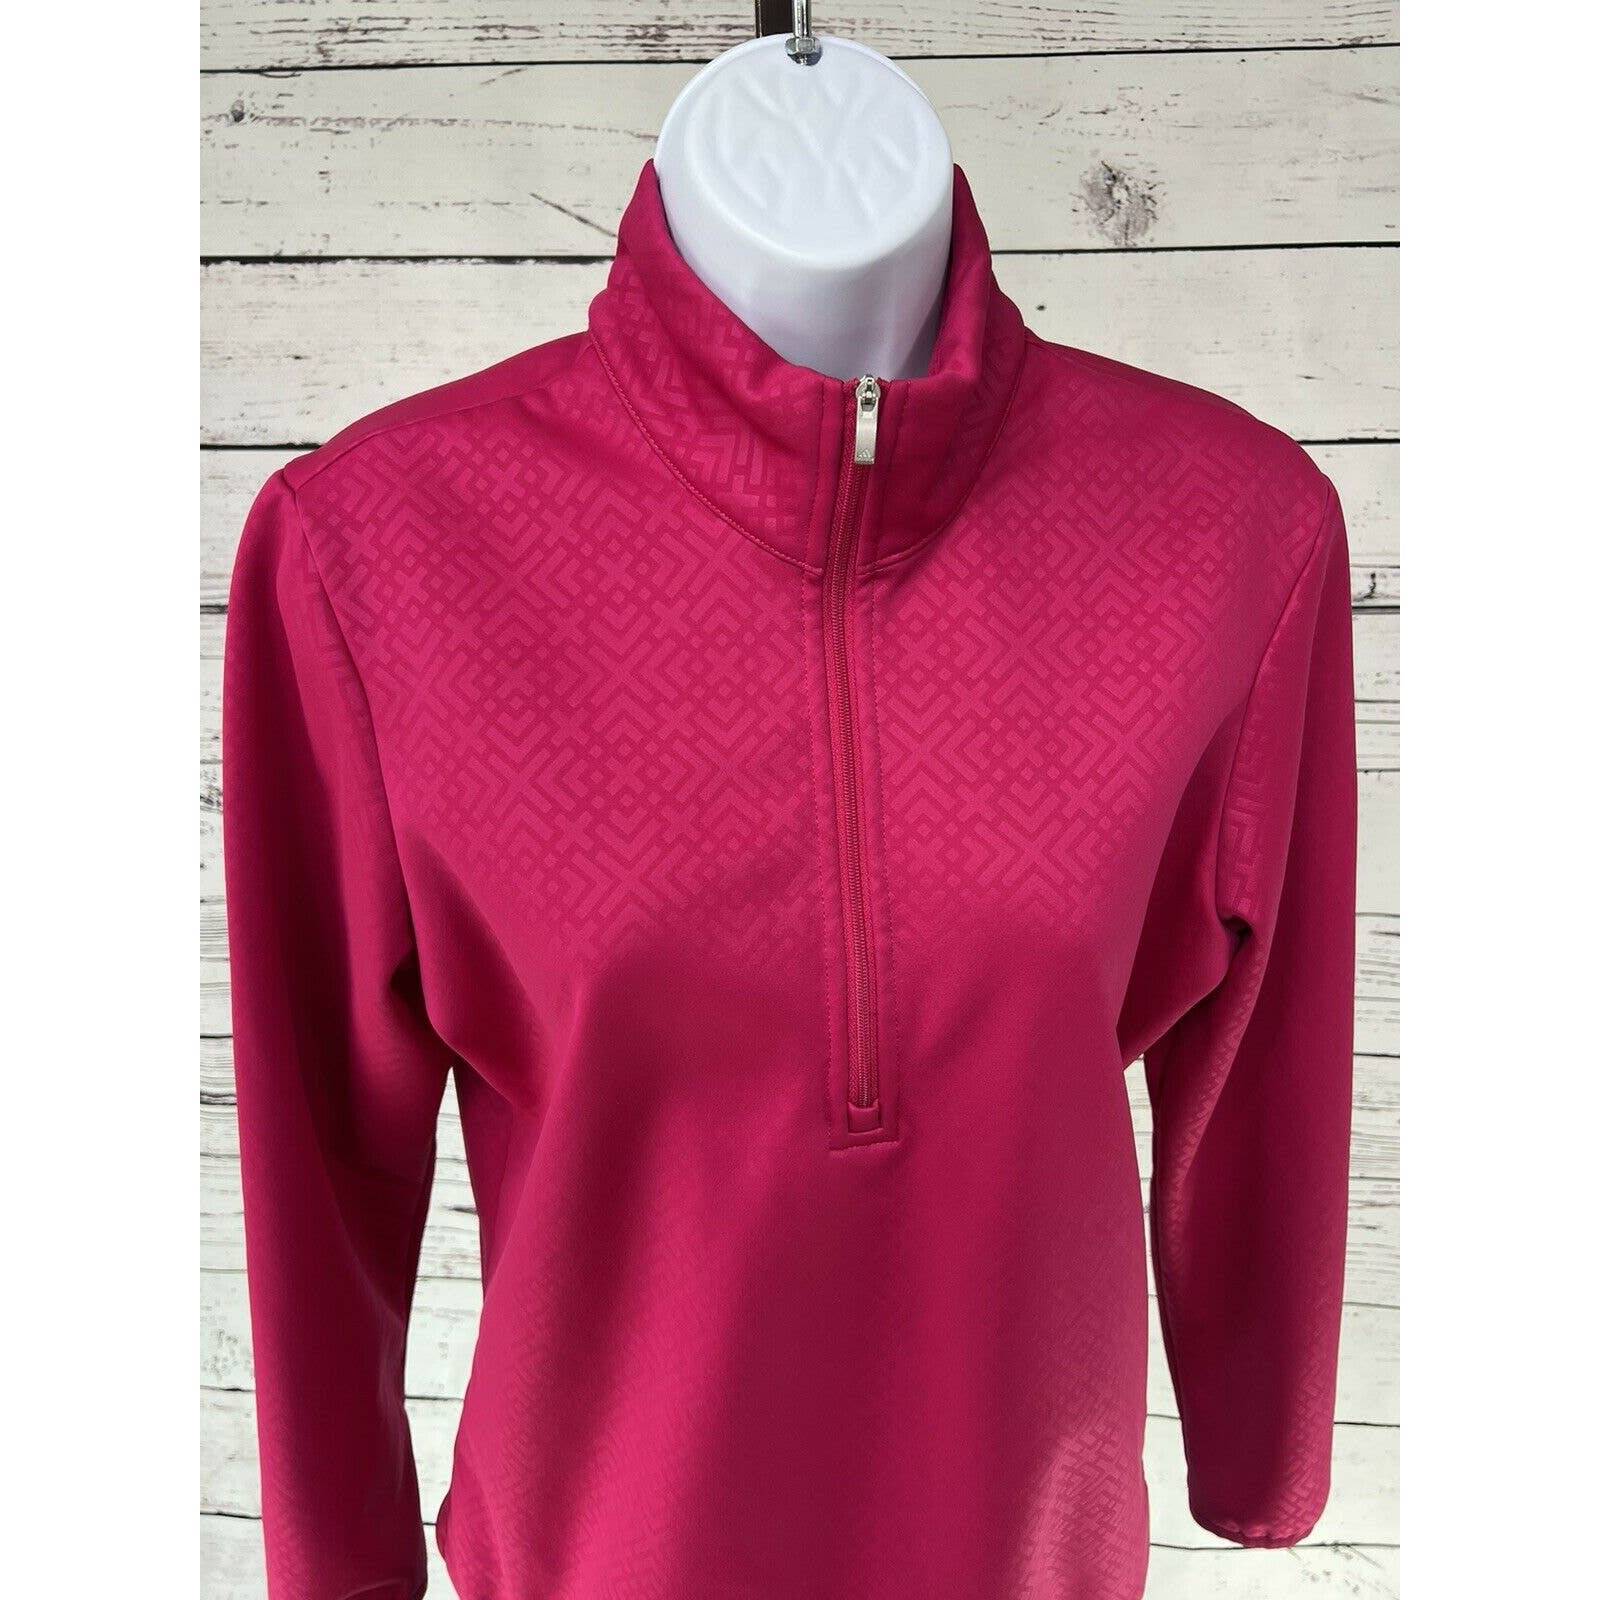 Adidas Women's Small Pink Long Sleeve 1/4 Zip Performance Pullover EXCELLENT